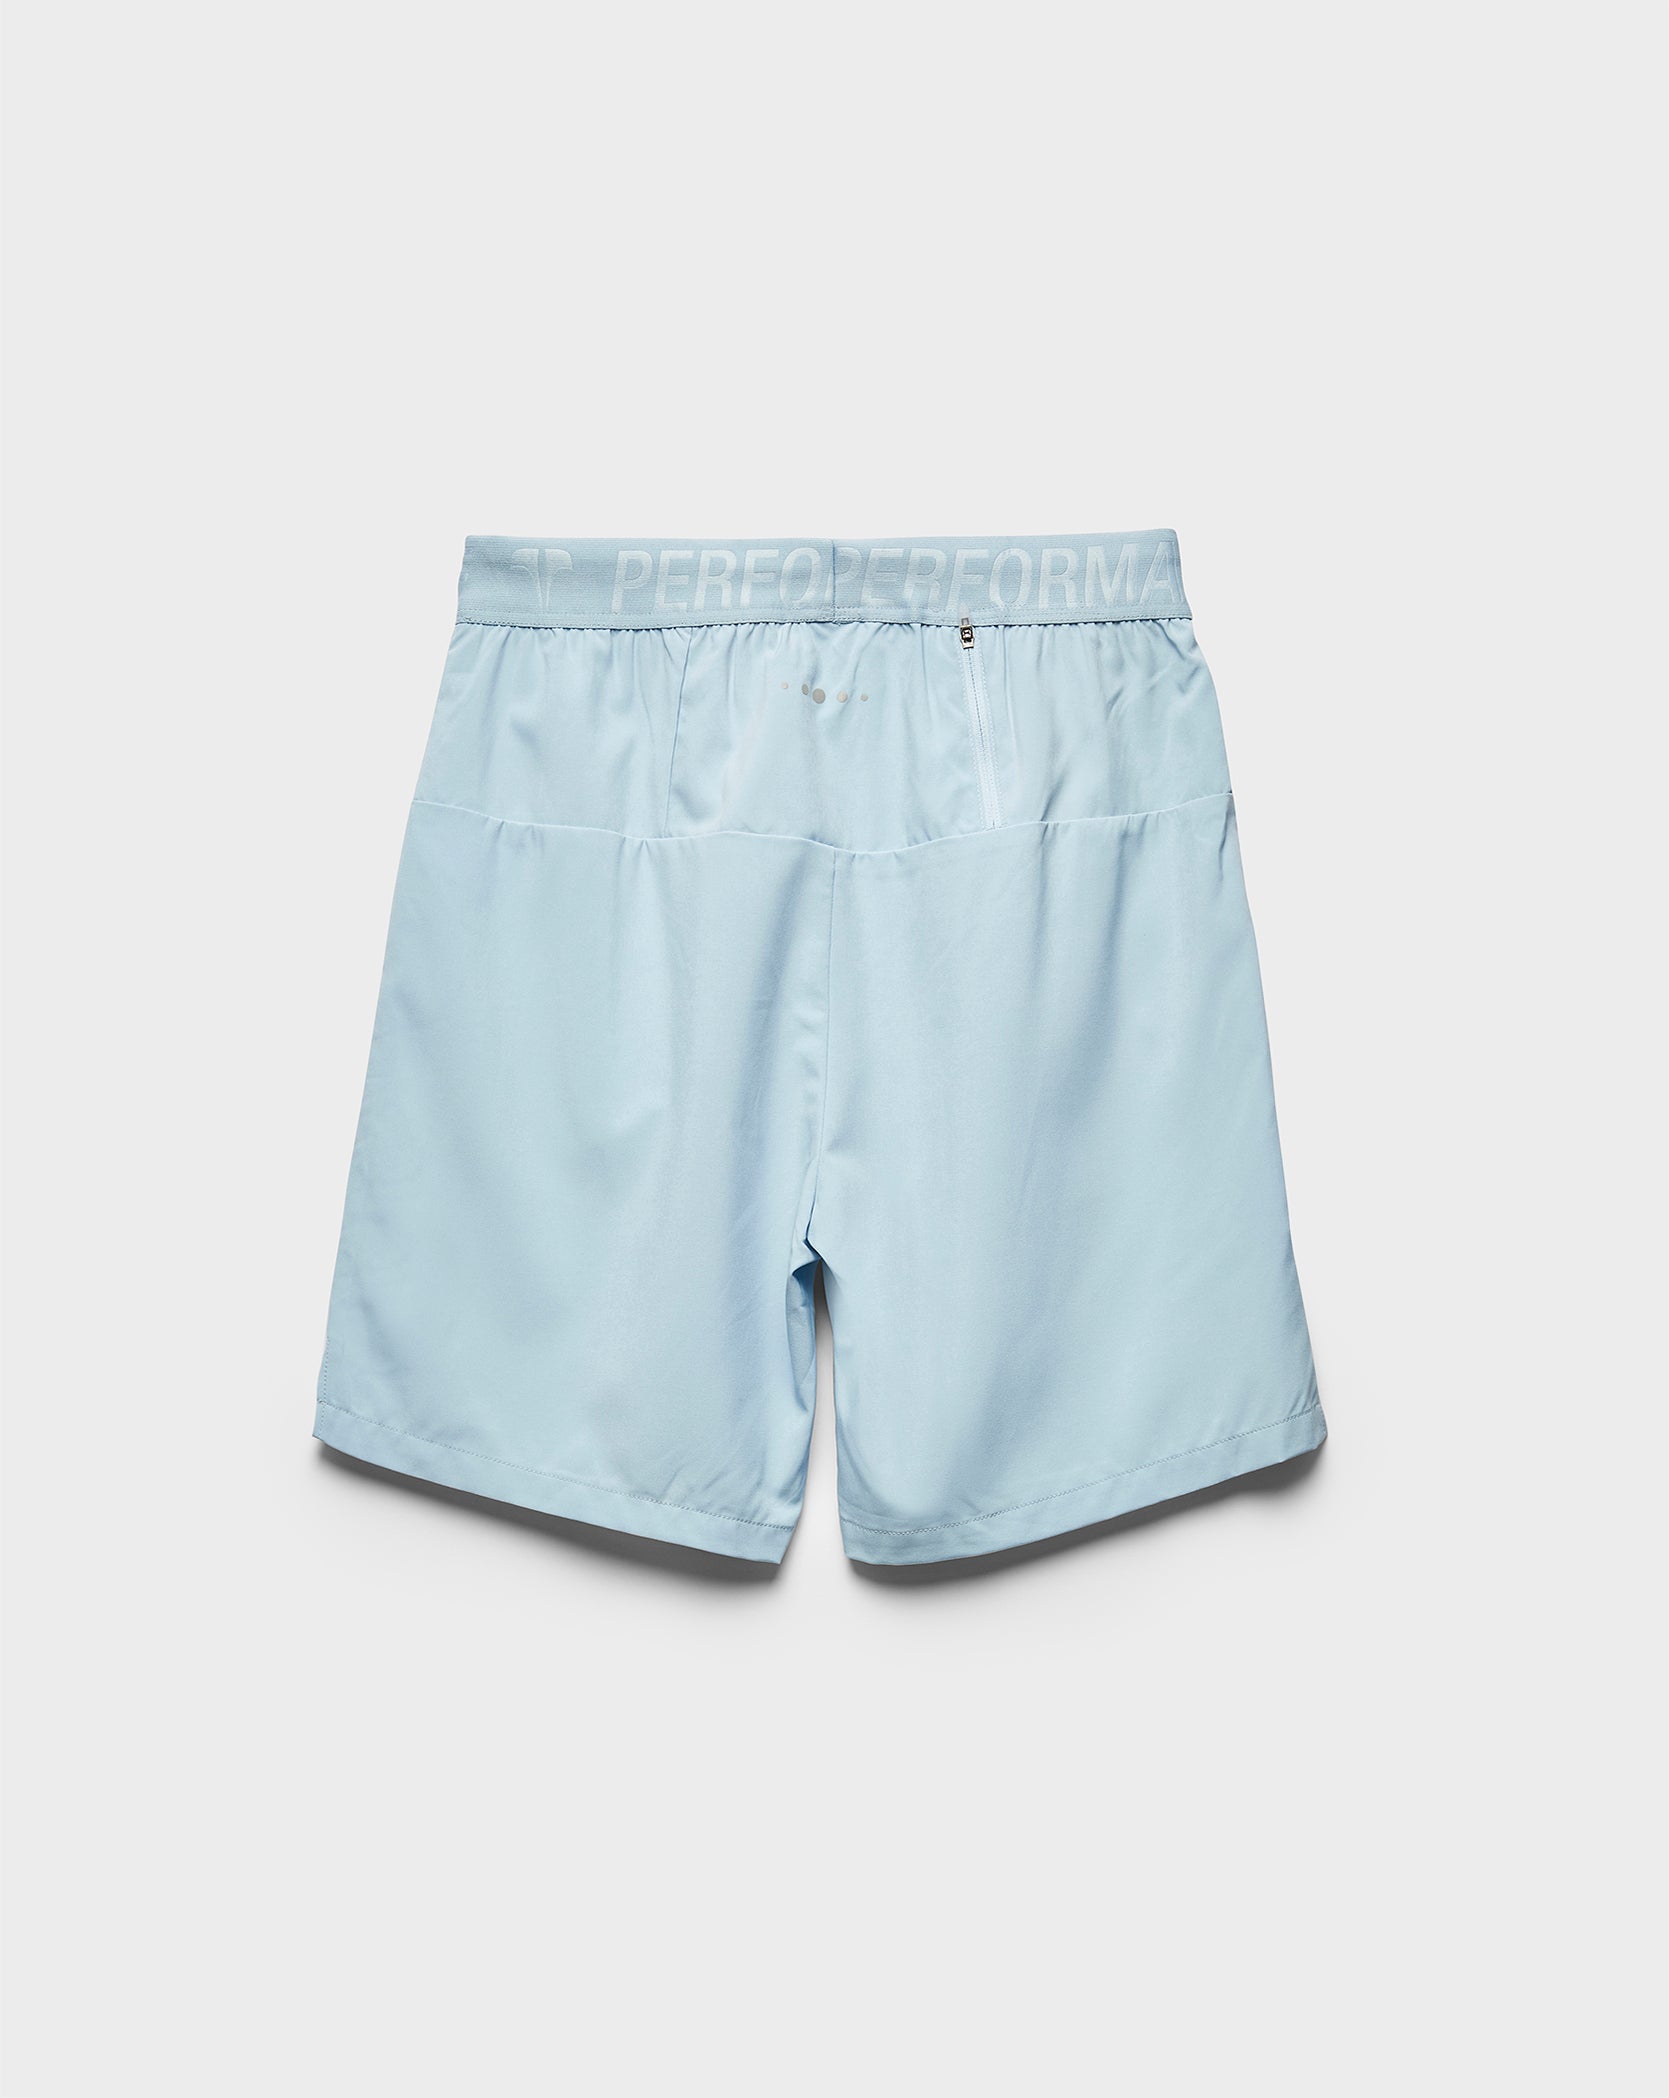 Twinzz active sky blue shorts back